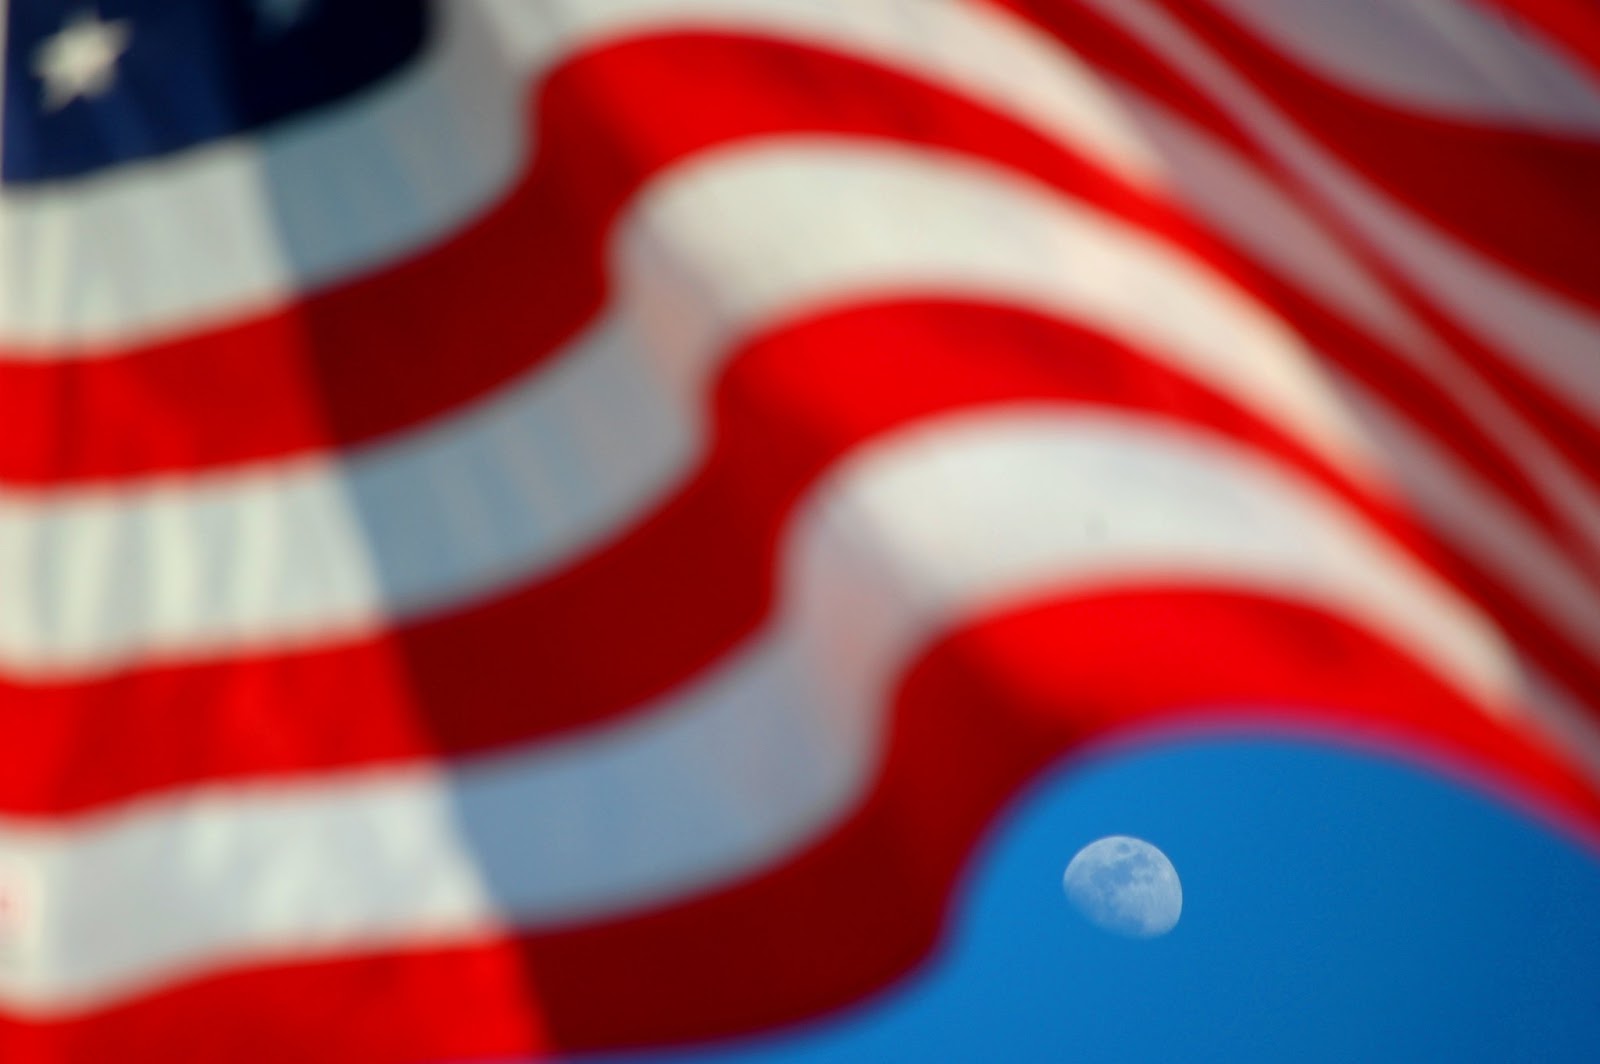 Blurred american flag with a clear focus on the moon in the background